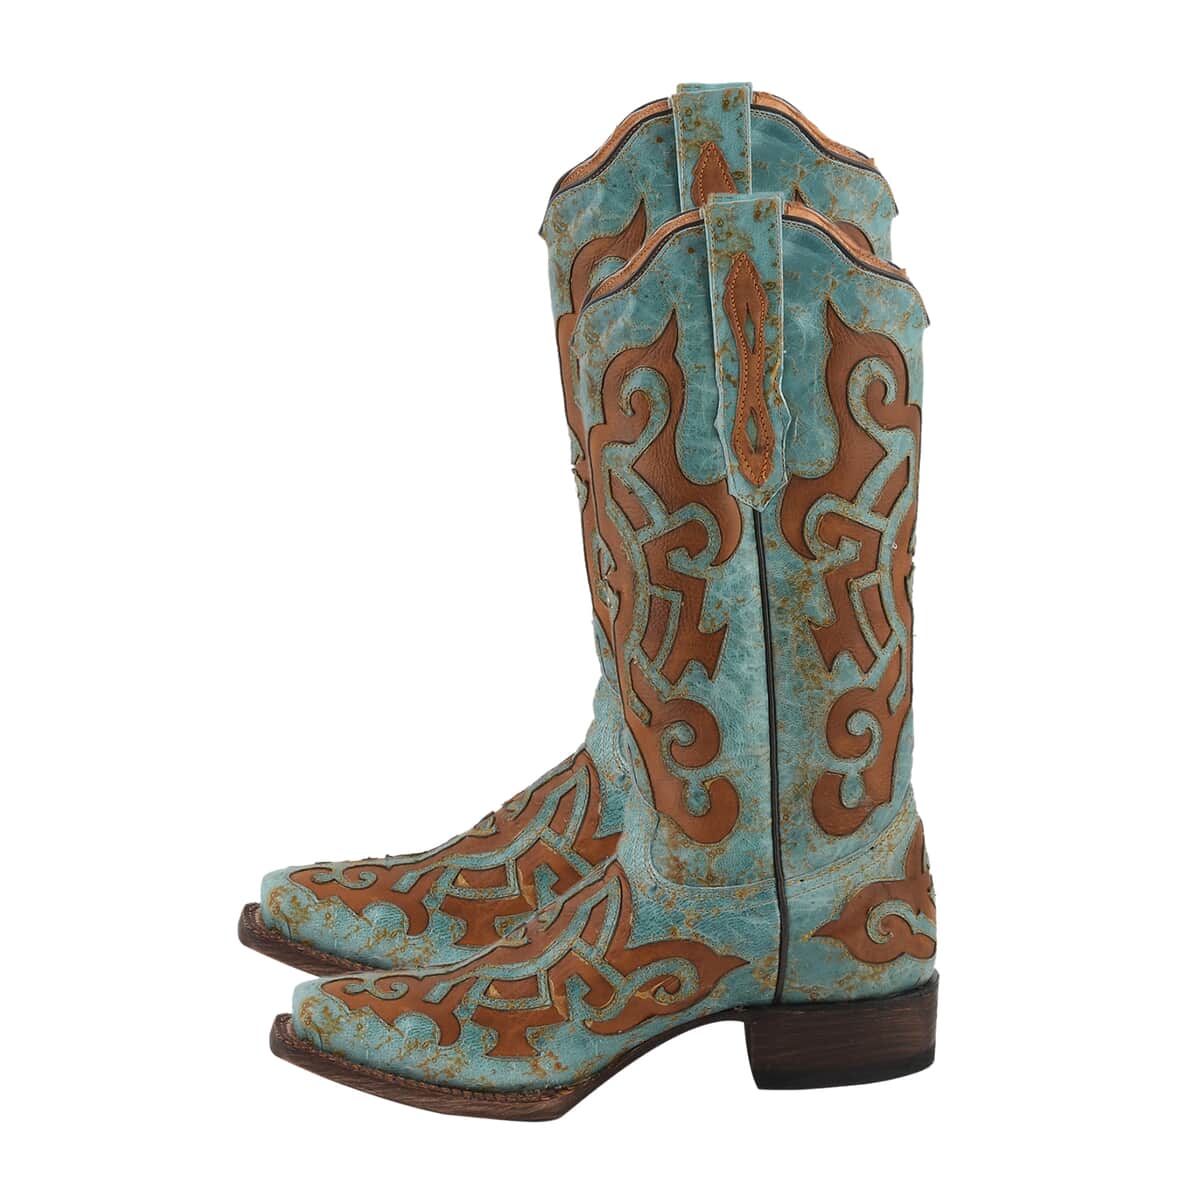 TANNER MARK 100% Genuine Leather Western Style Square Toe Boot with Glitter Lace Design - Turquoise/Cognac - Size 5.5 image number 1